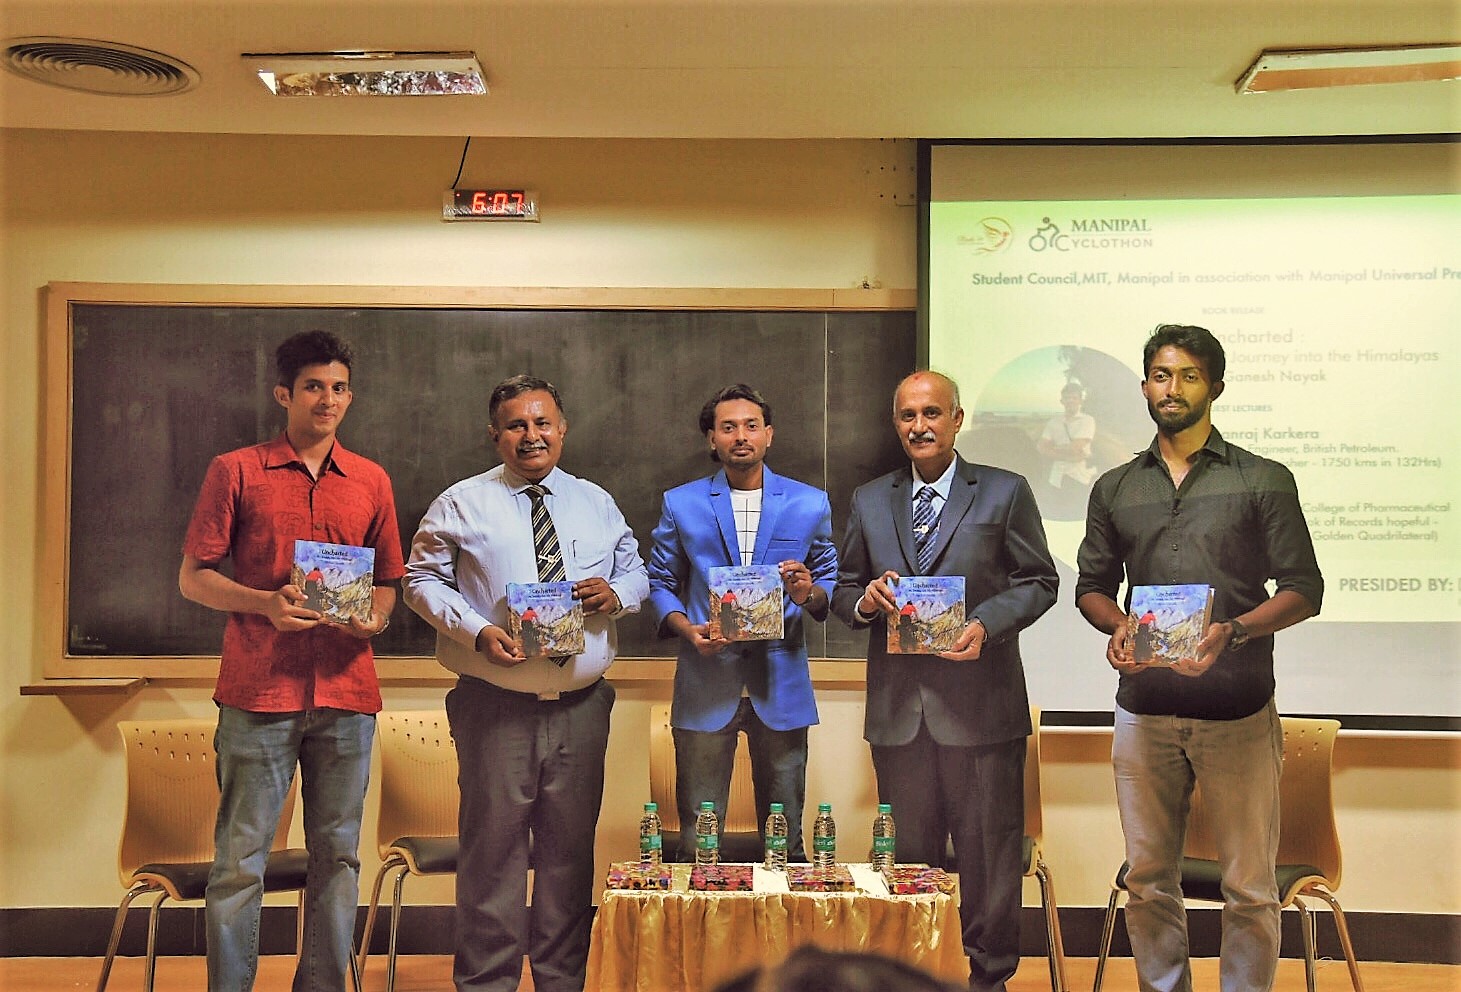 MIT faculty’s book on journey into Himalayas released